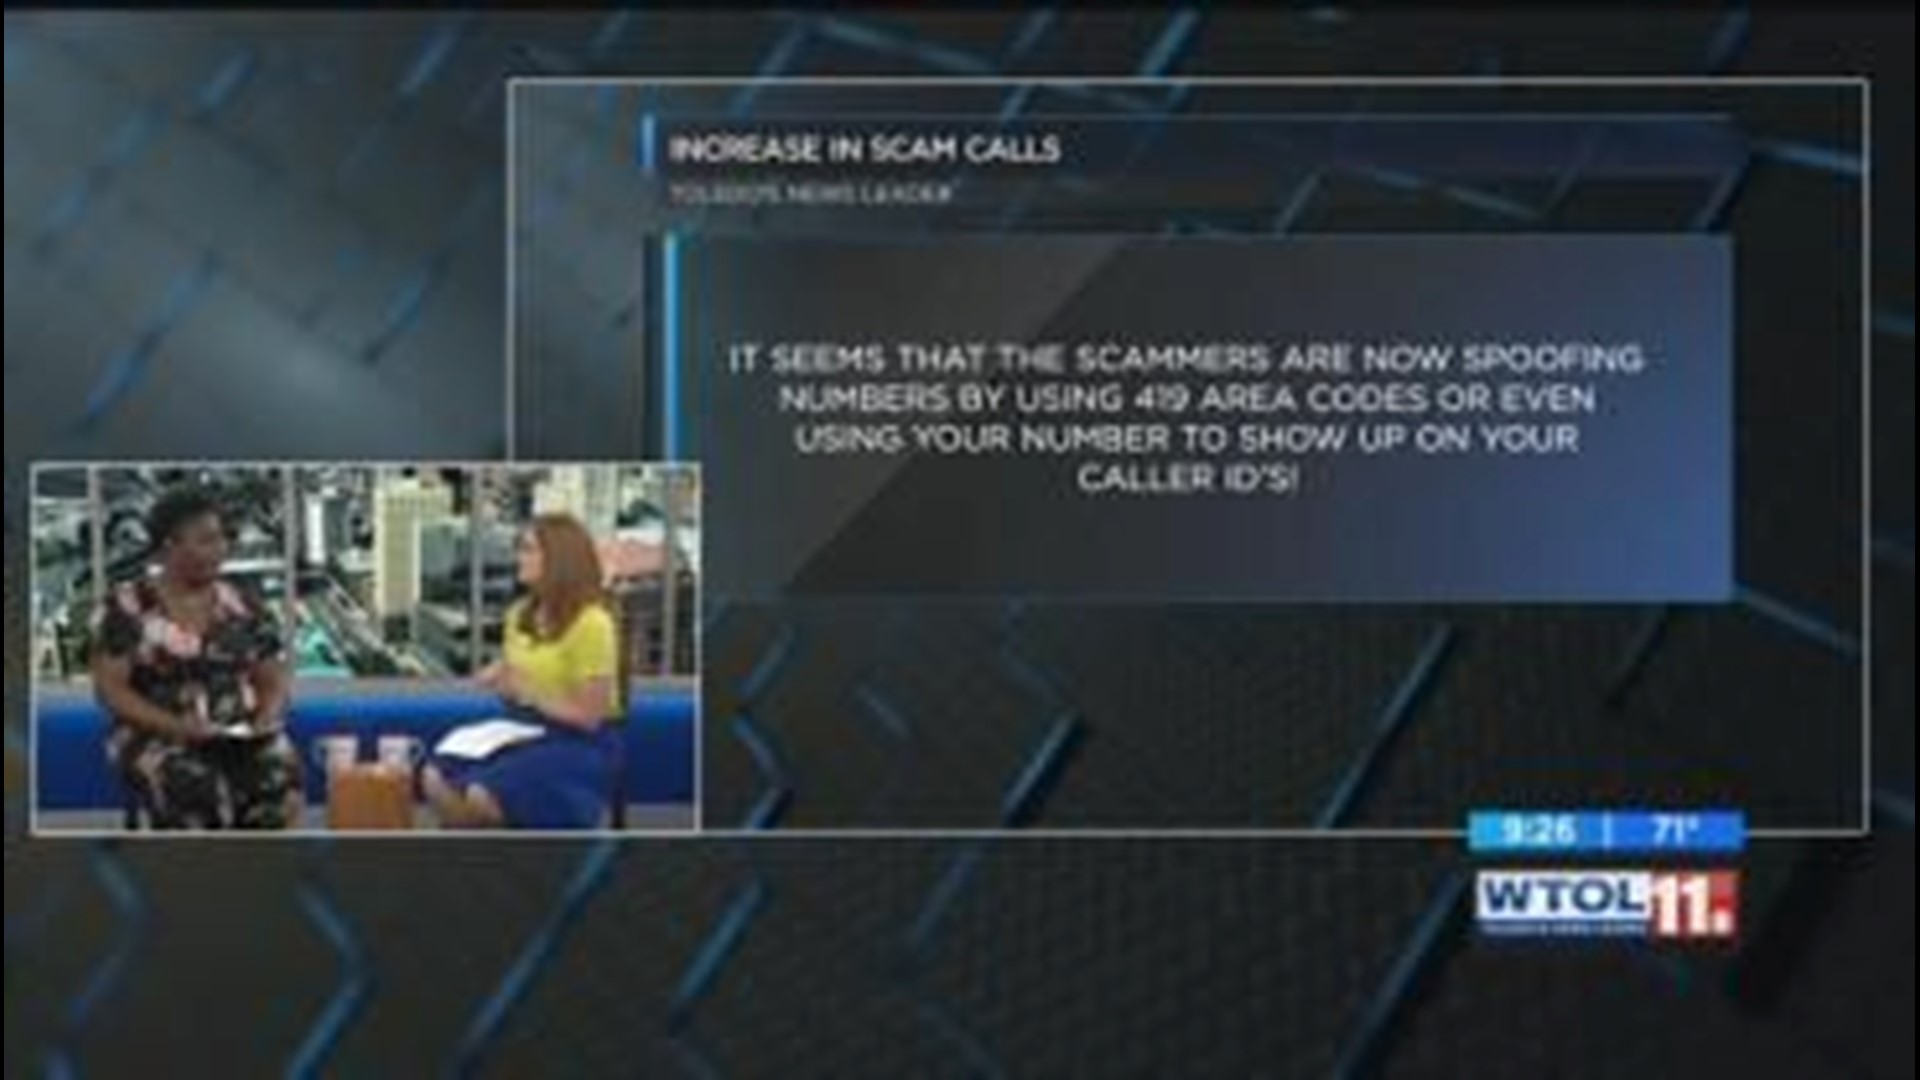 BBB: Always be on the lookout for scams